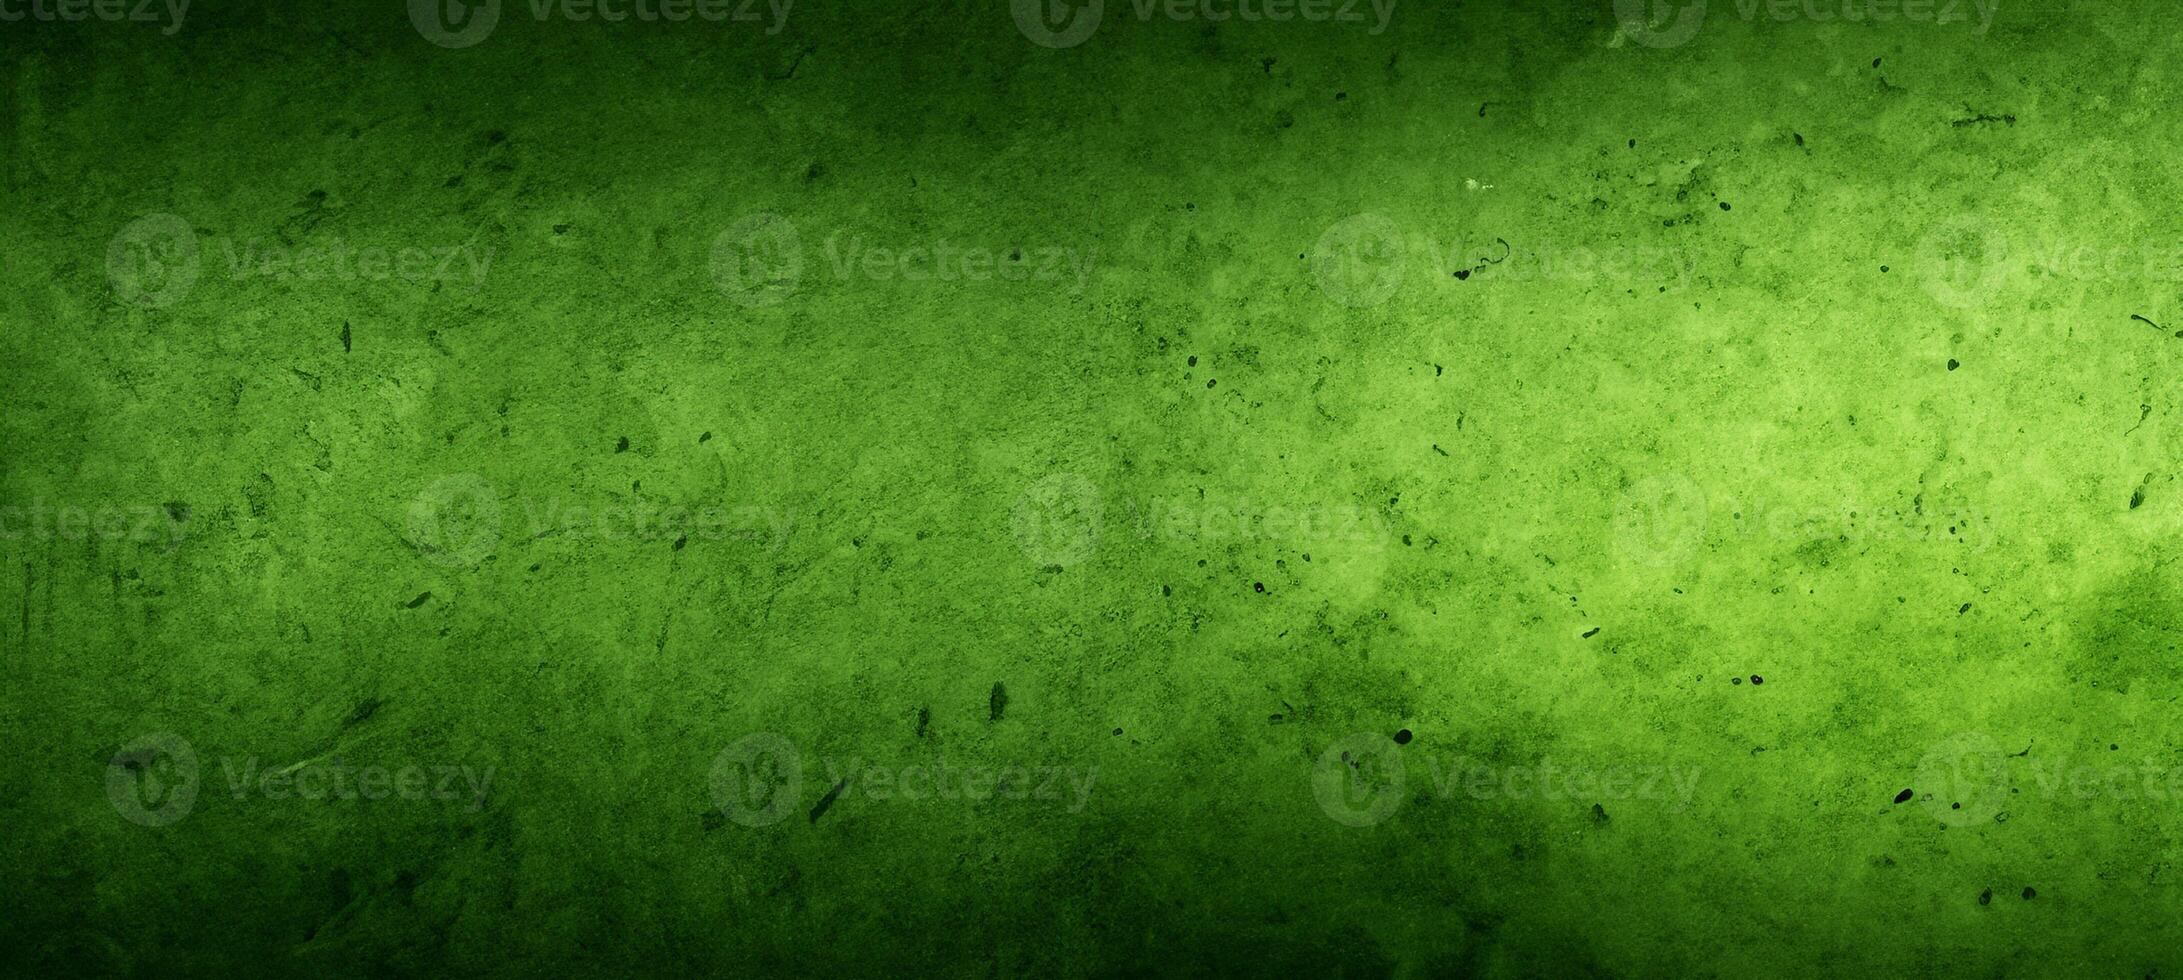 Green grunge concrete stone wall texture background photo